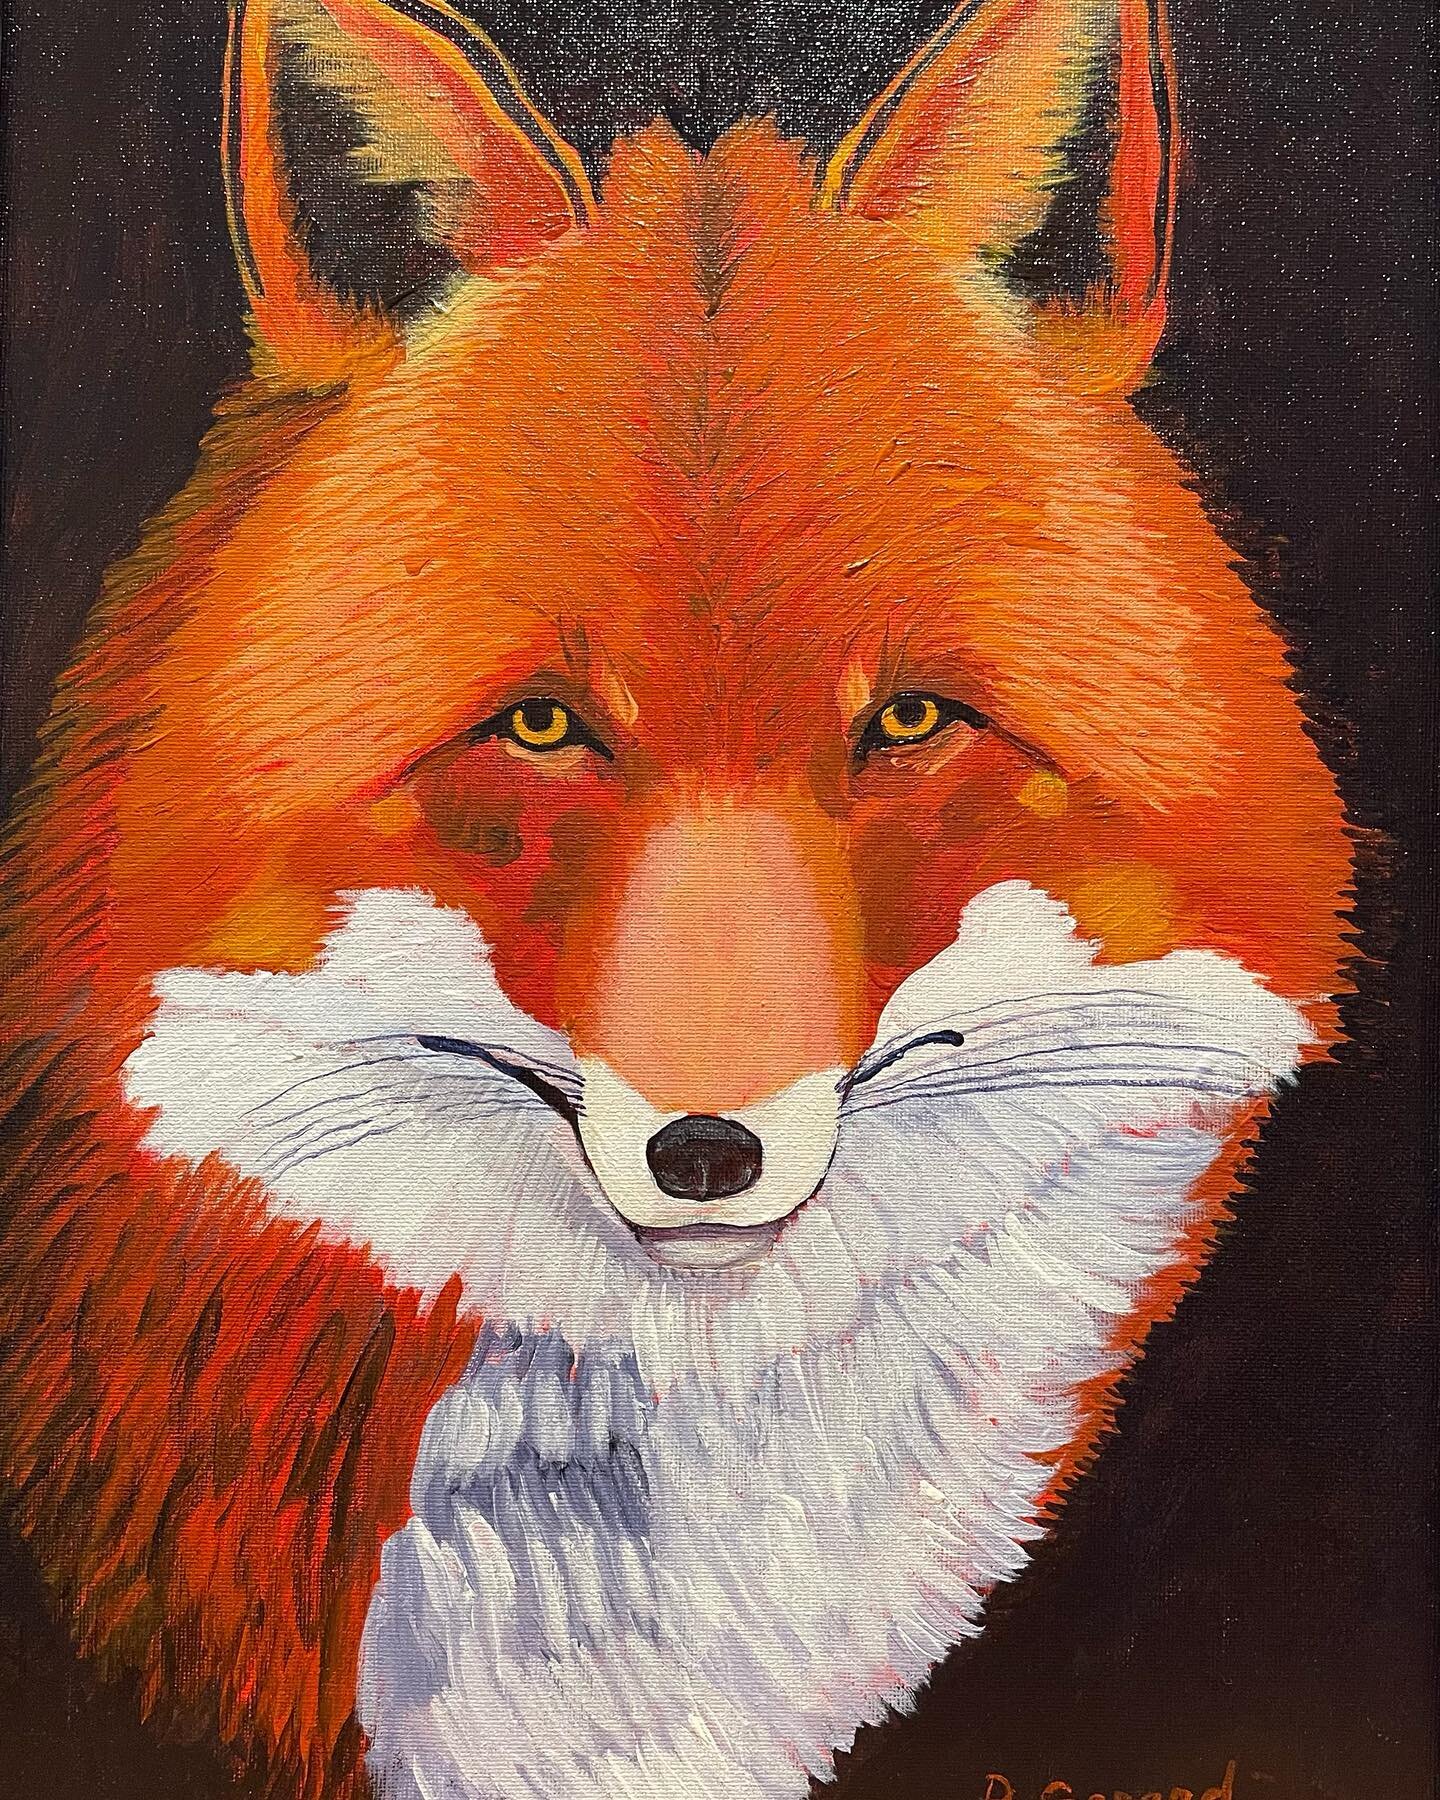 Fall Fox, available at the Art Connective&rsquo;s Critters5 show now through February 4, 2023 at www.artconnective.org. #artconnective #artconnectiveartist  #acrylicpaintings #foxpainting #redfox